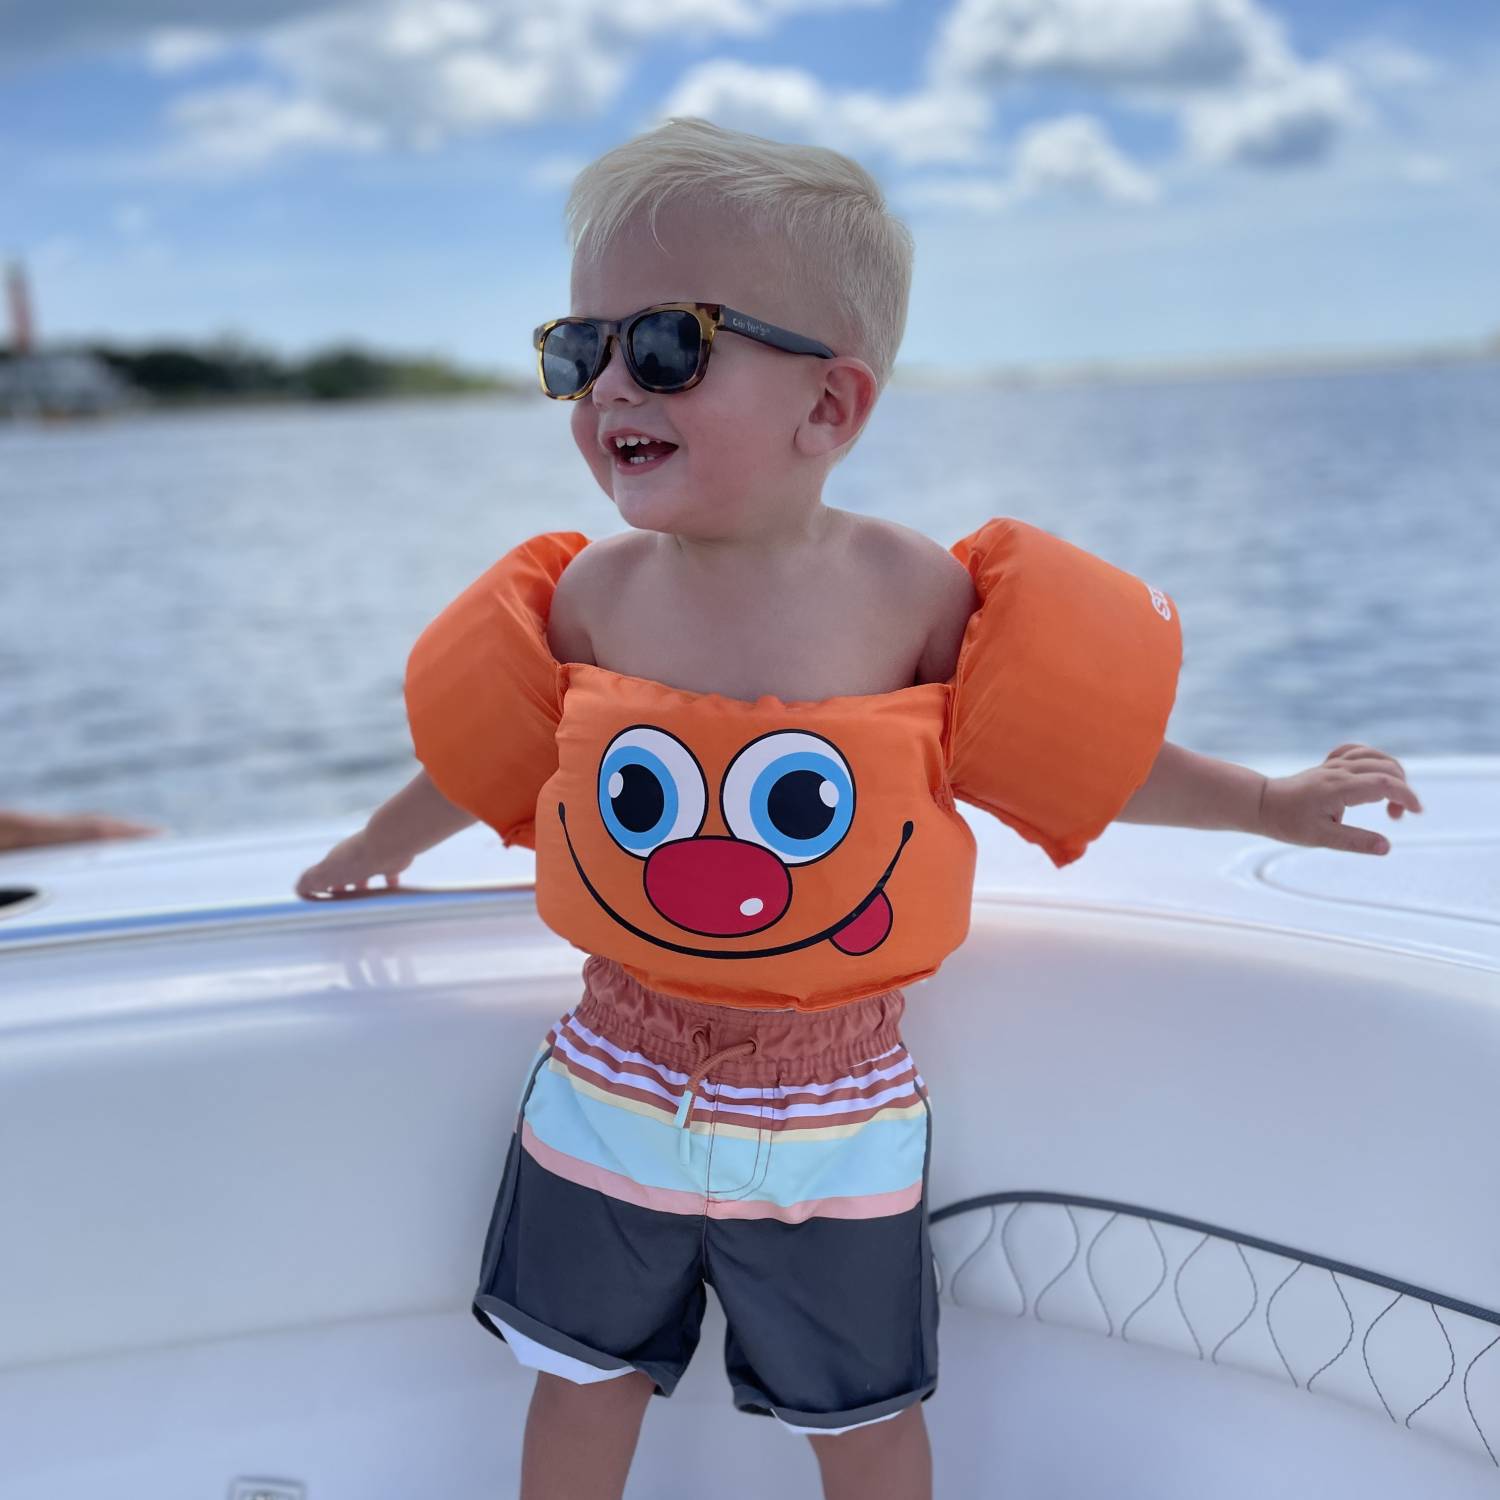 Our boy Shelby is 2. He loves the water and speed. He couldn’t get enough of the wind in his...